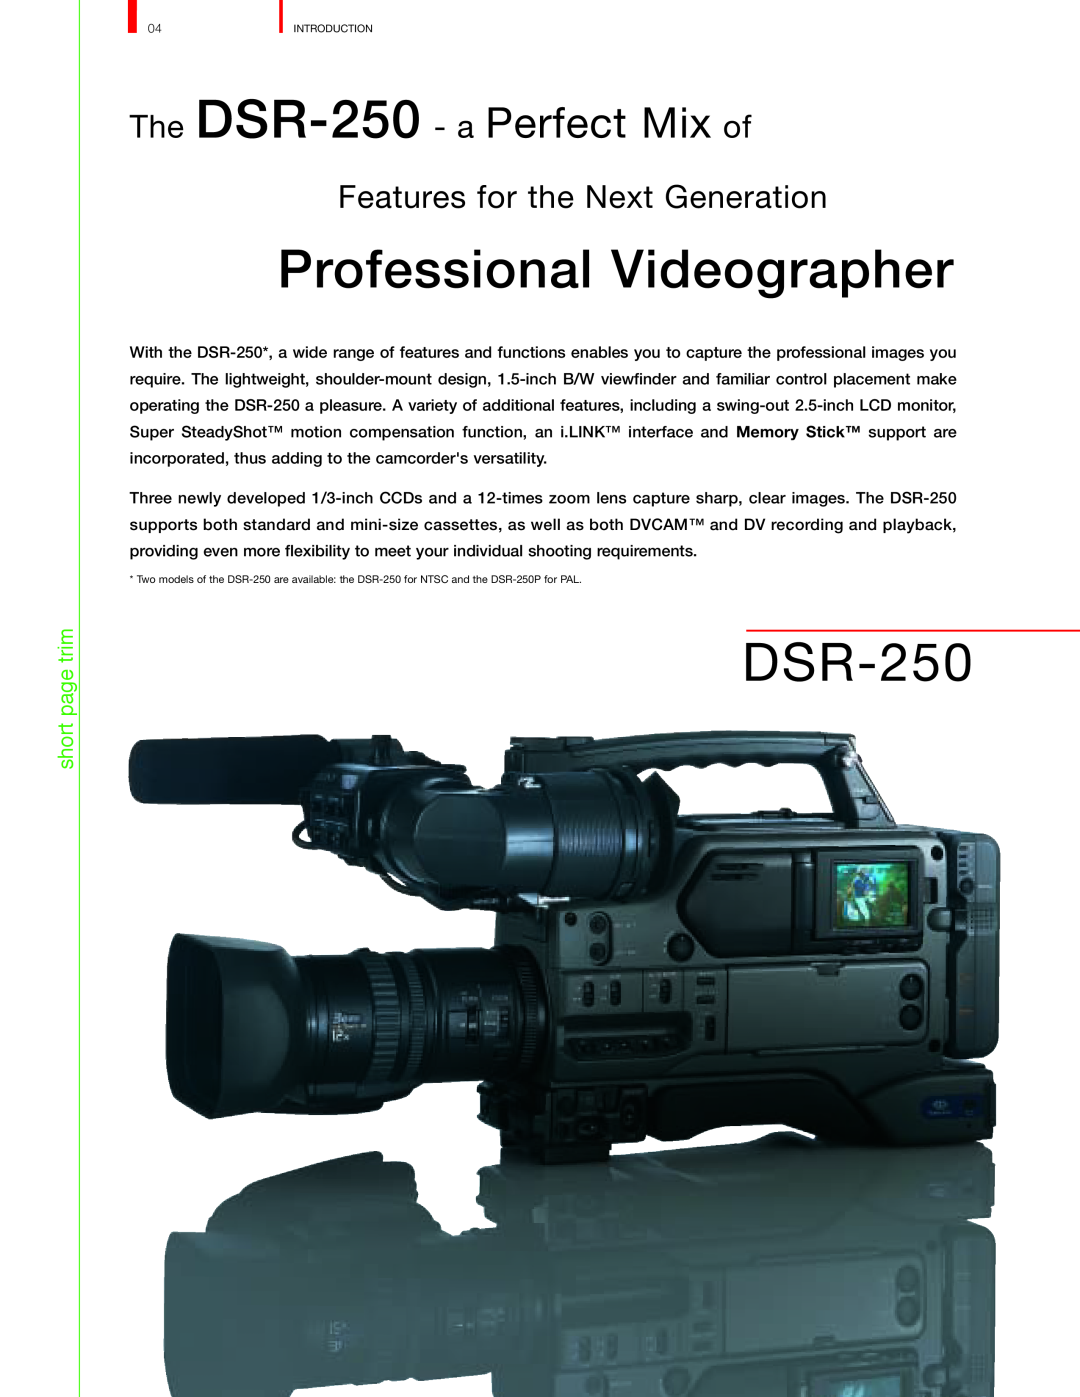 Sony DSR-250P The DSR-250 - a Perfect Mix of, short page trim, Professional Videographer, Features for the Next Generation 